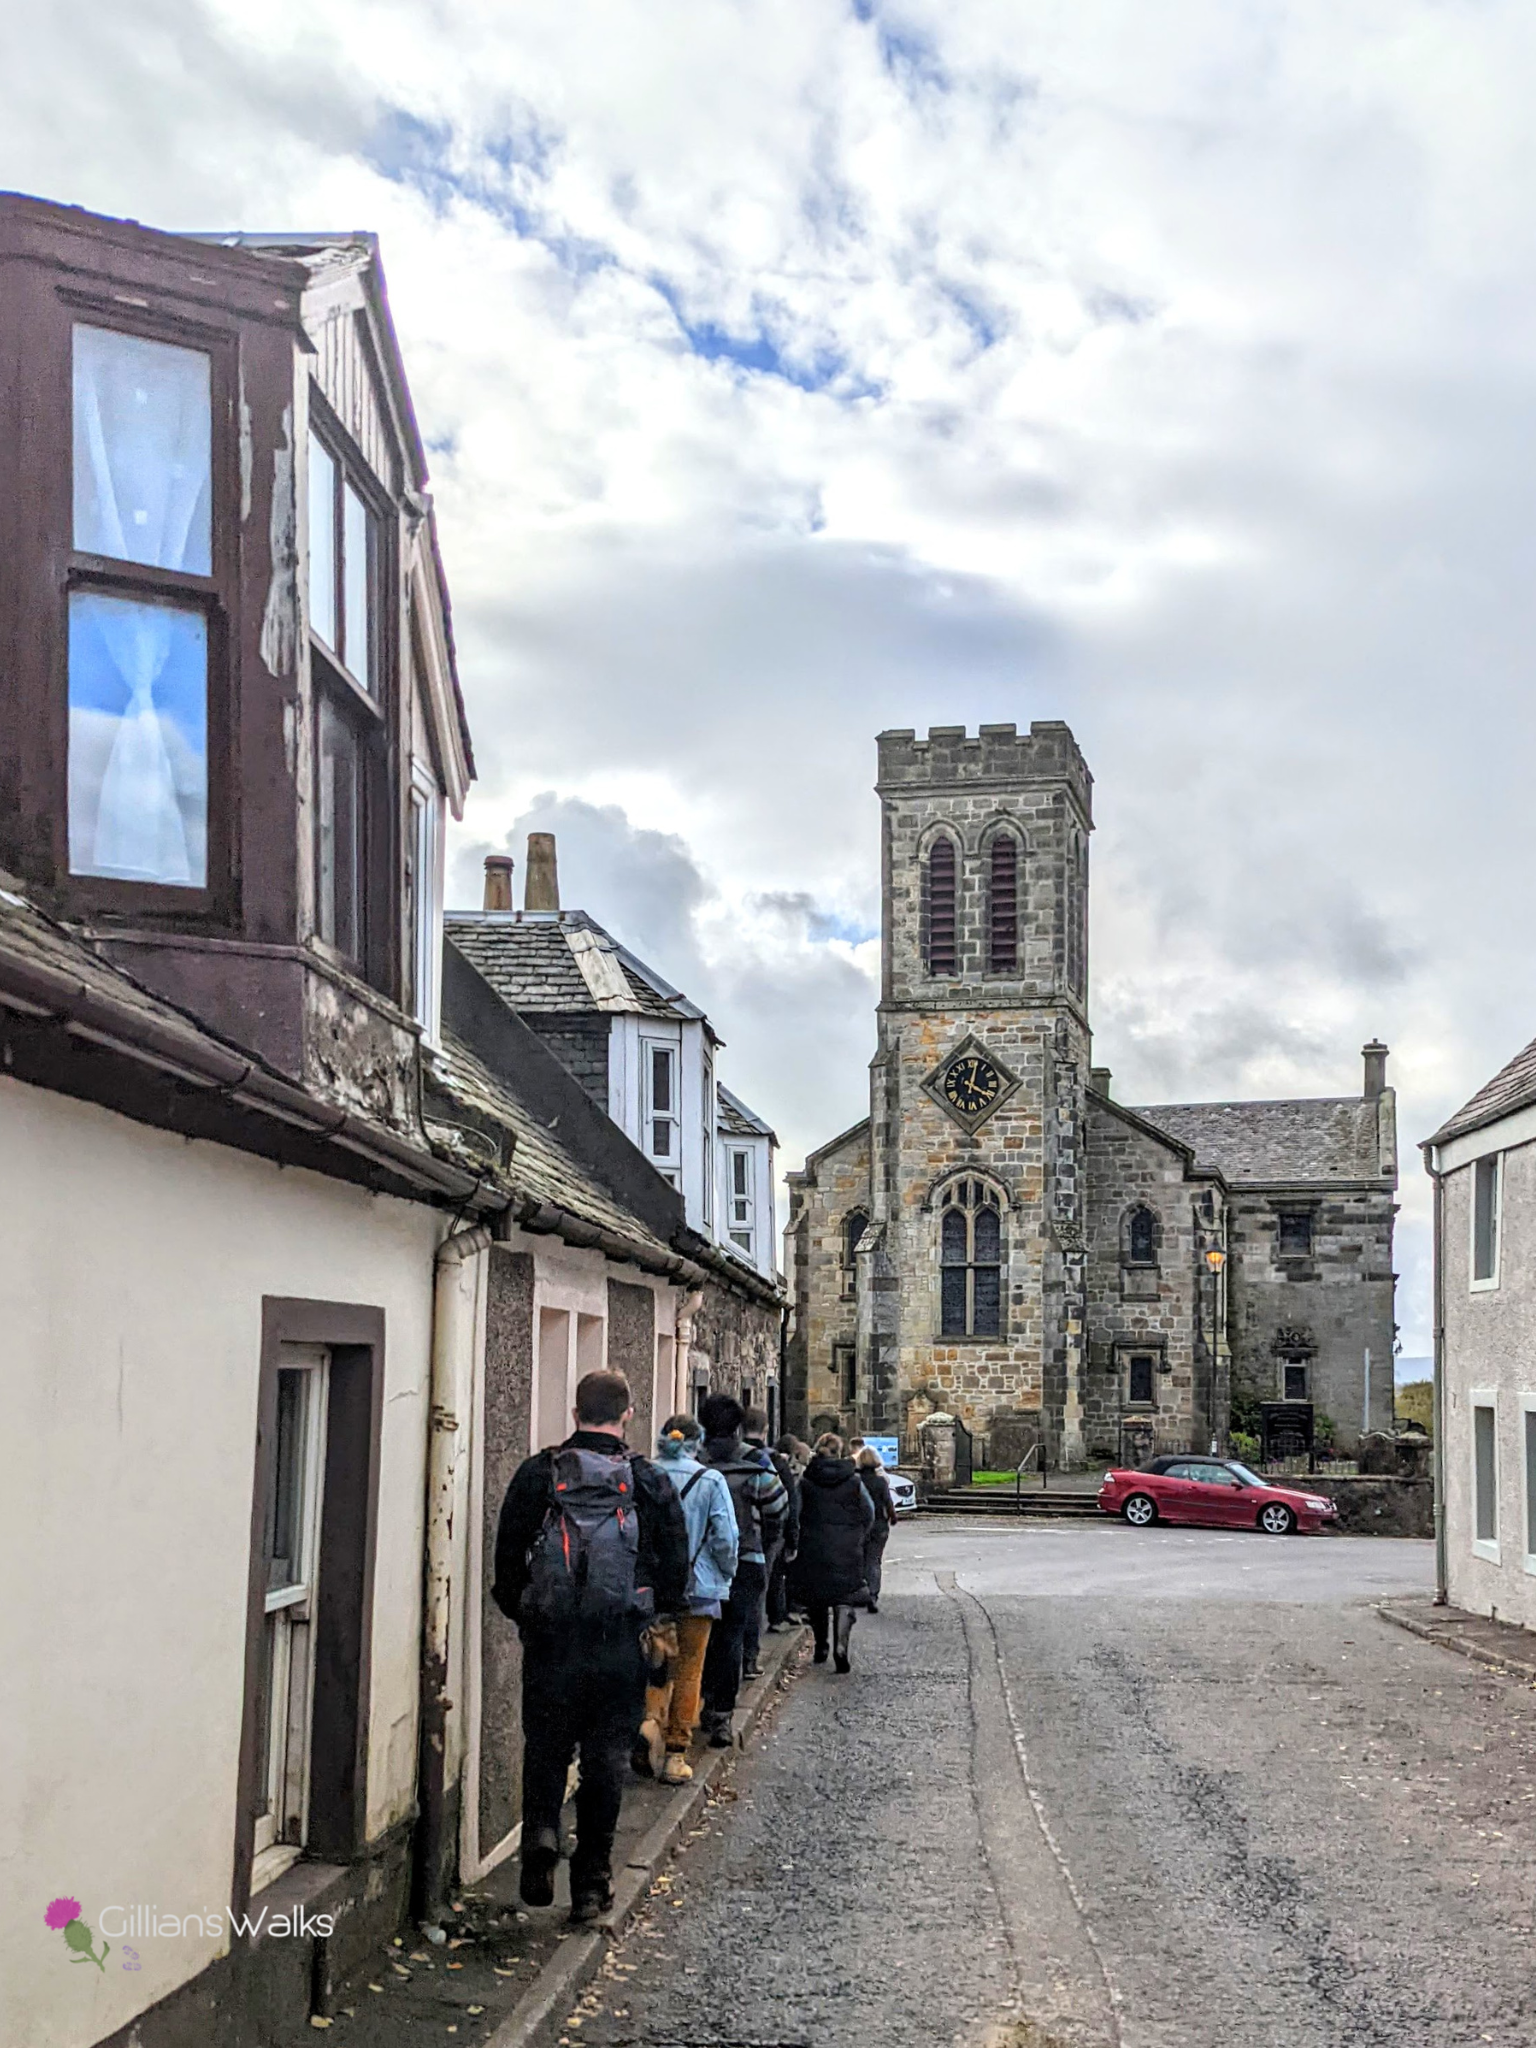 A group of people walking single file along the narrow pavement on Main Street in Dunlop.